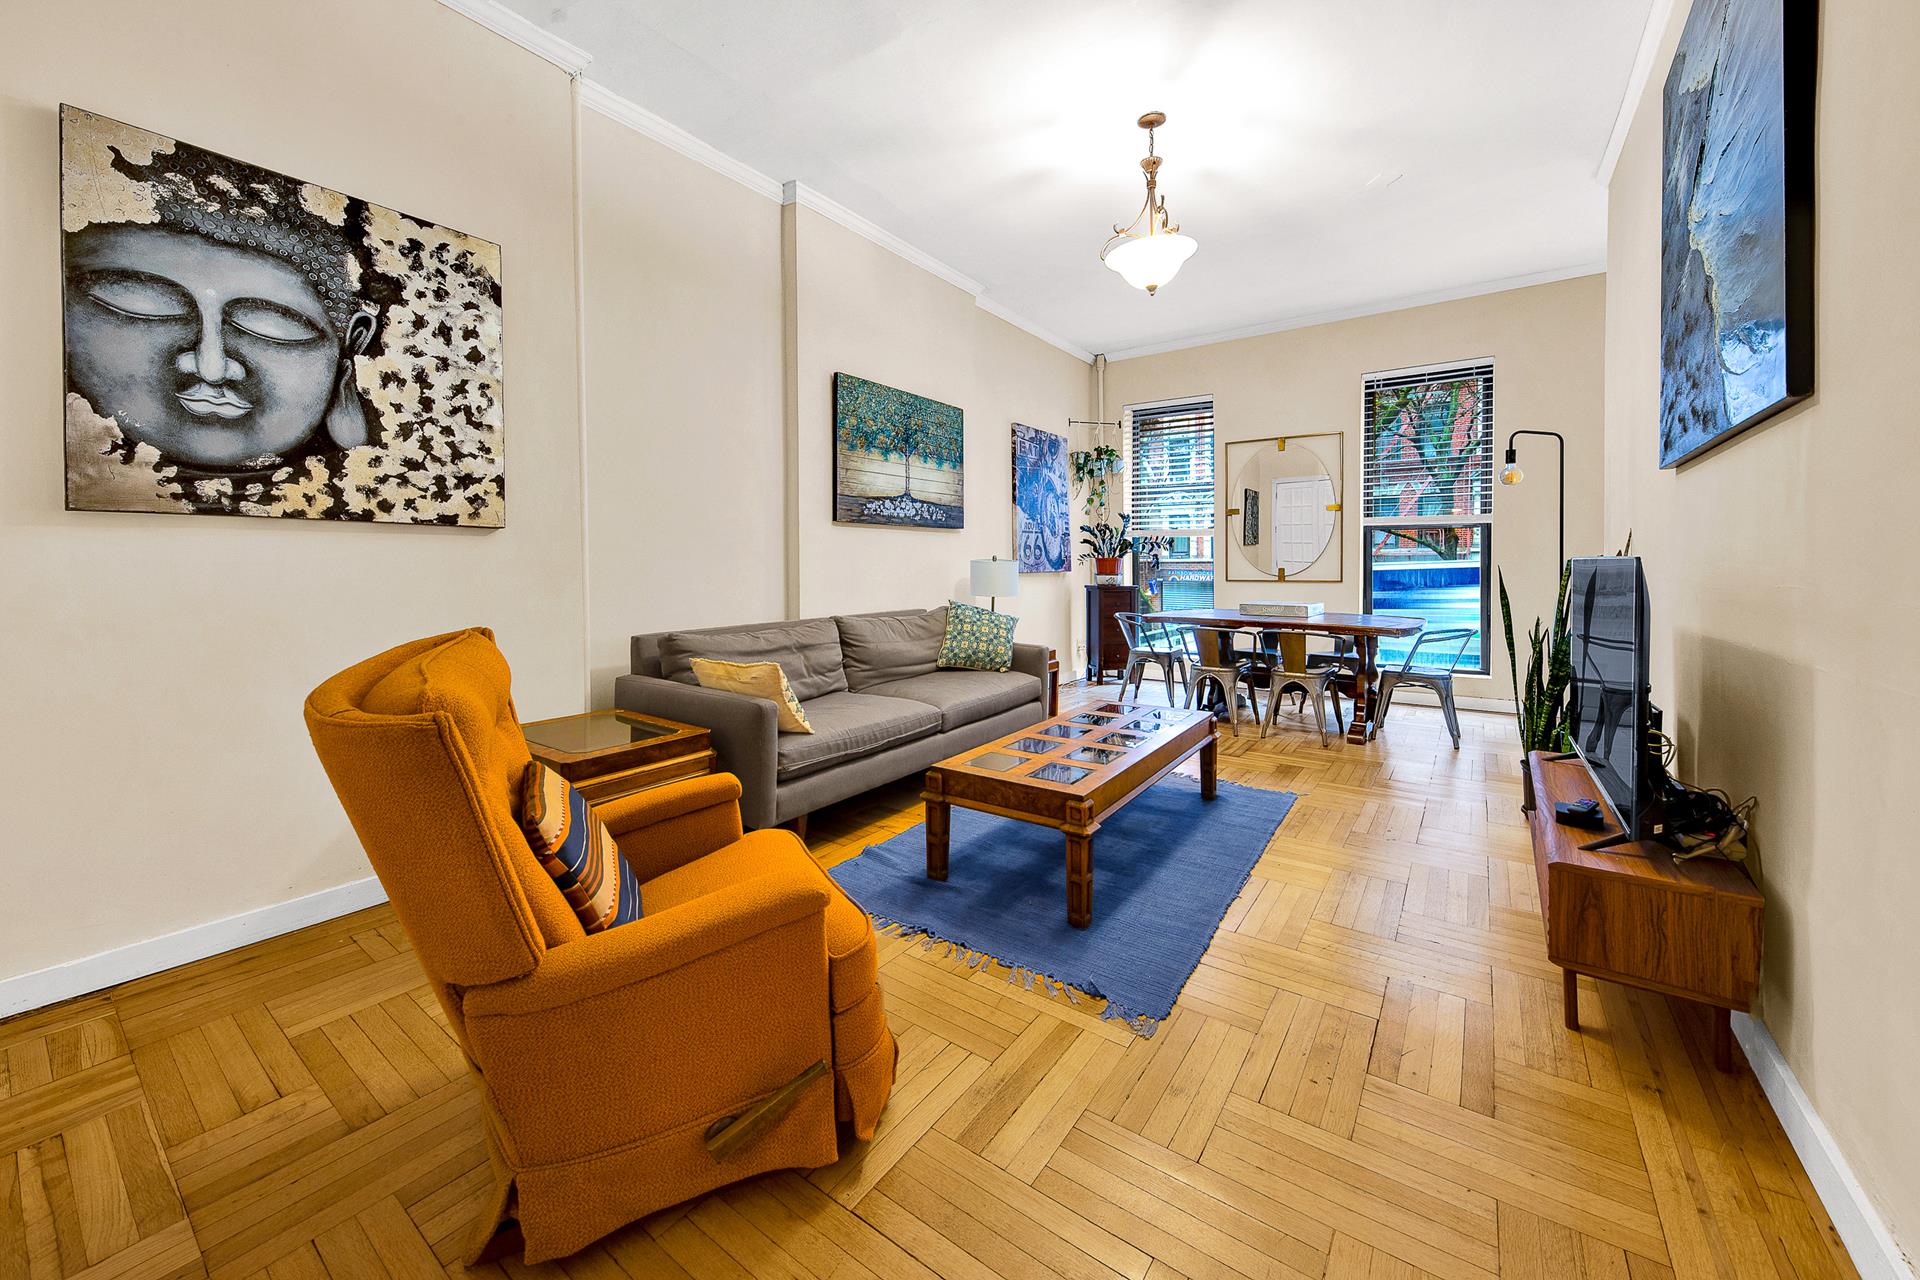 331 East 65th Street, Lenox Hill, Upper East Side, NYC - 2 Bedrooms  
2 Bathrooms  
5 Rooms - 